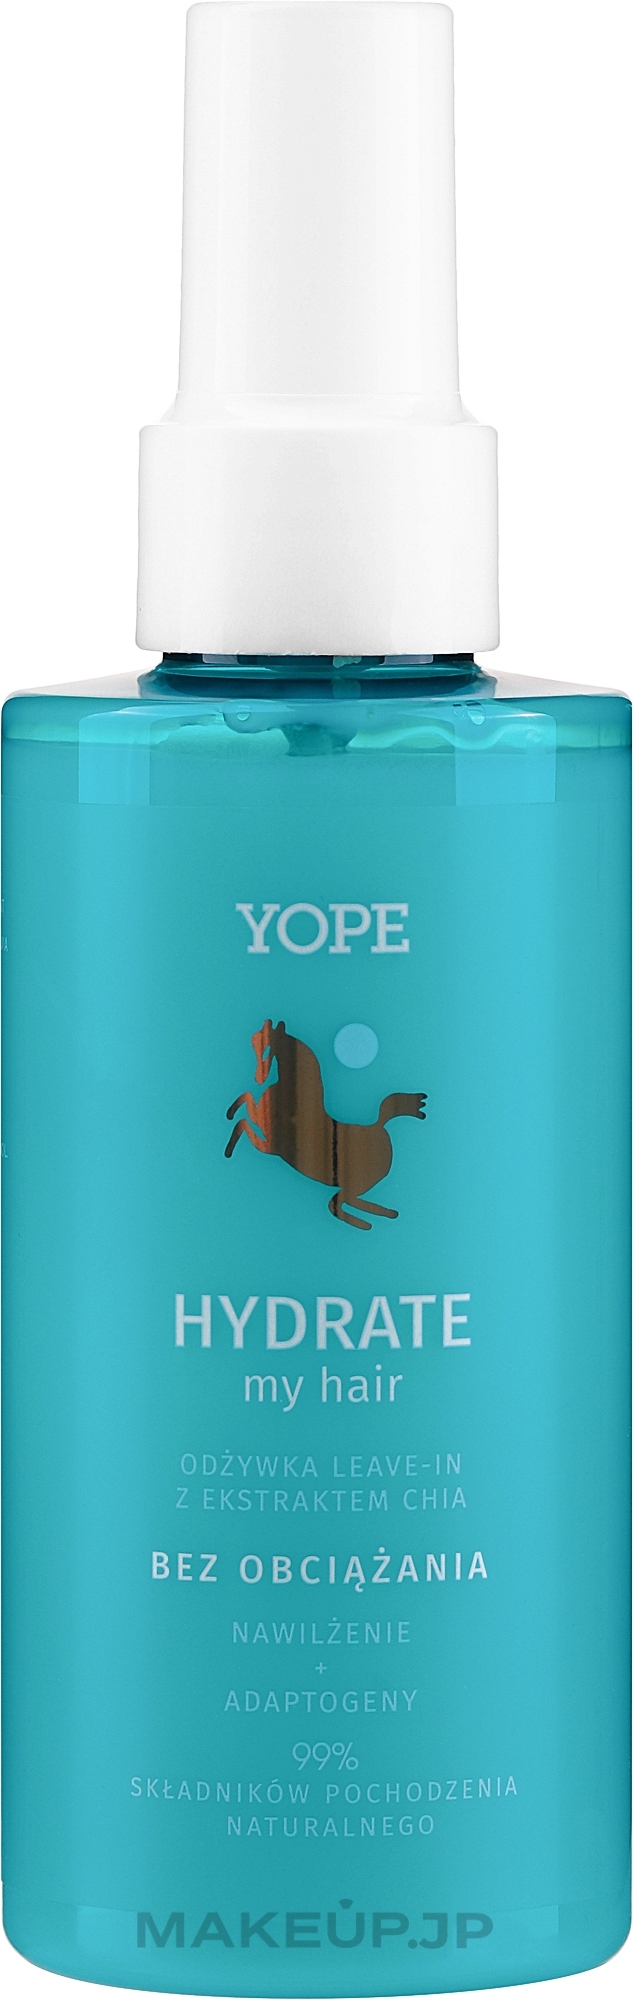 Leave-In Hair Conditioner - Yope Hydrate — photo 150 ml